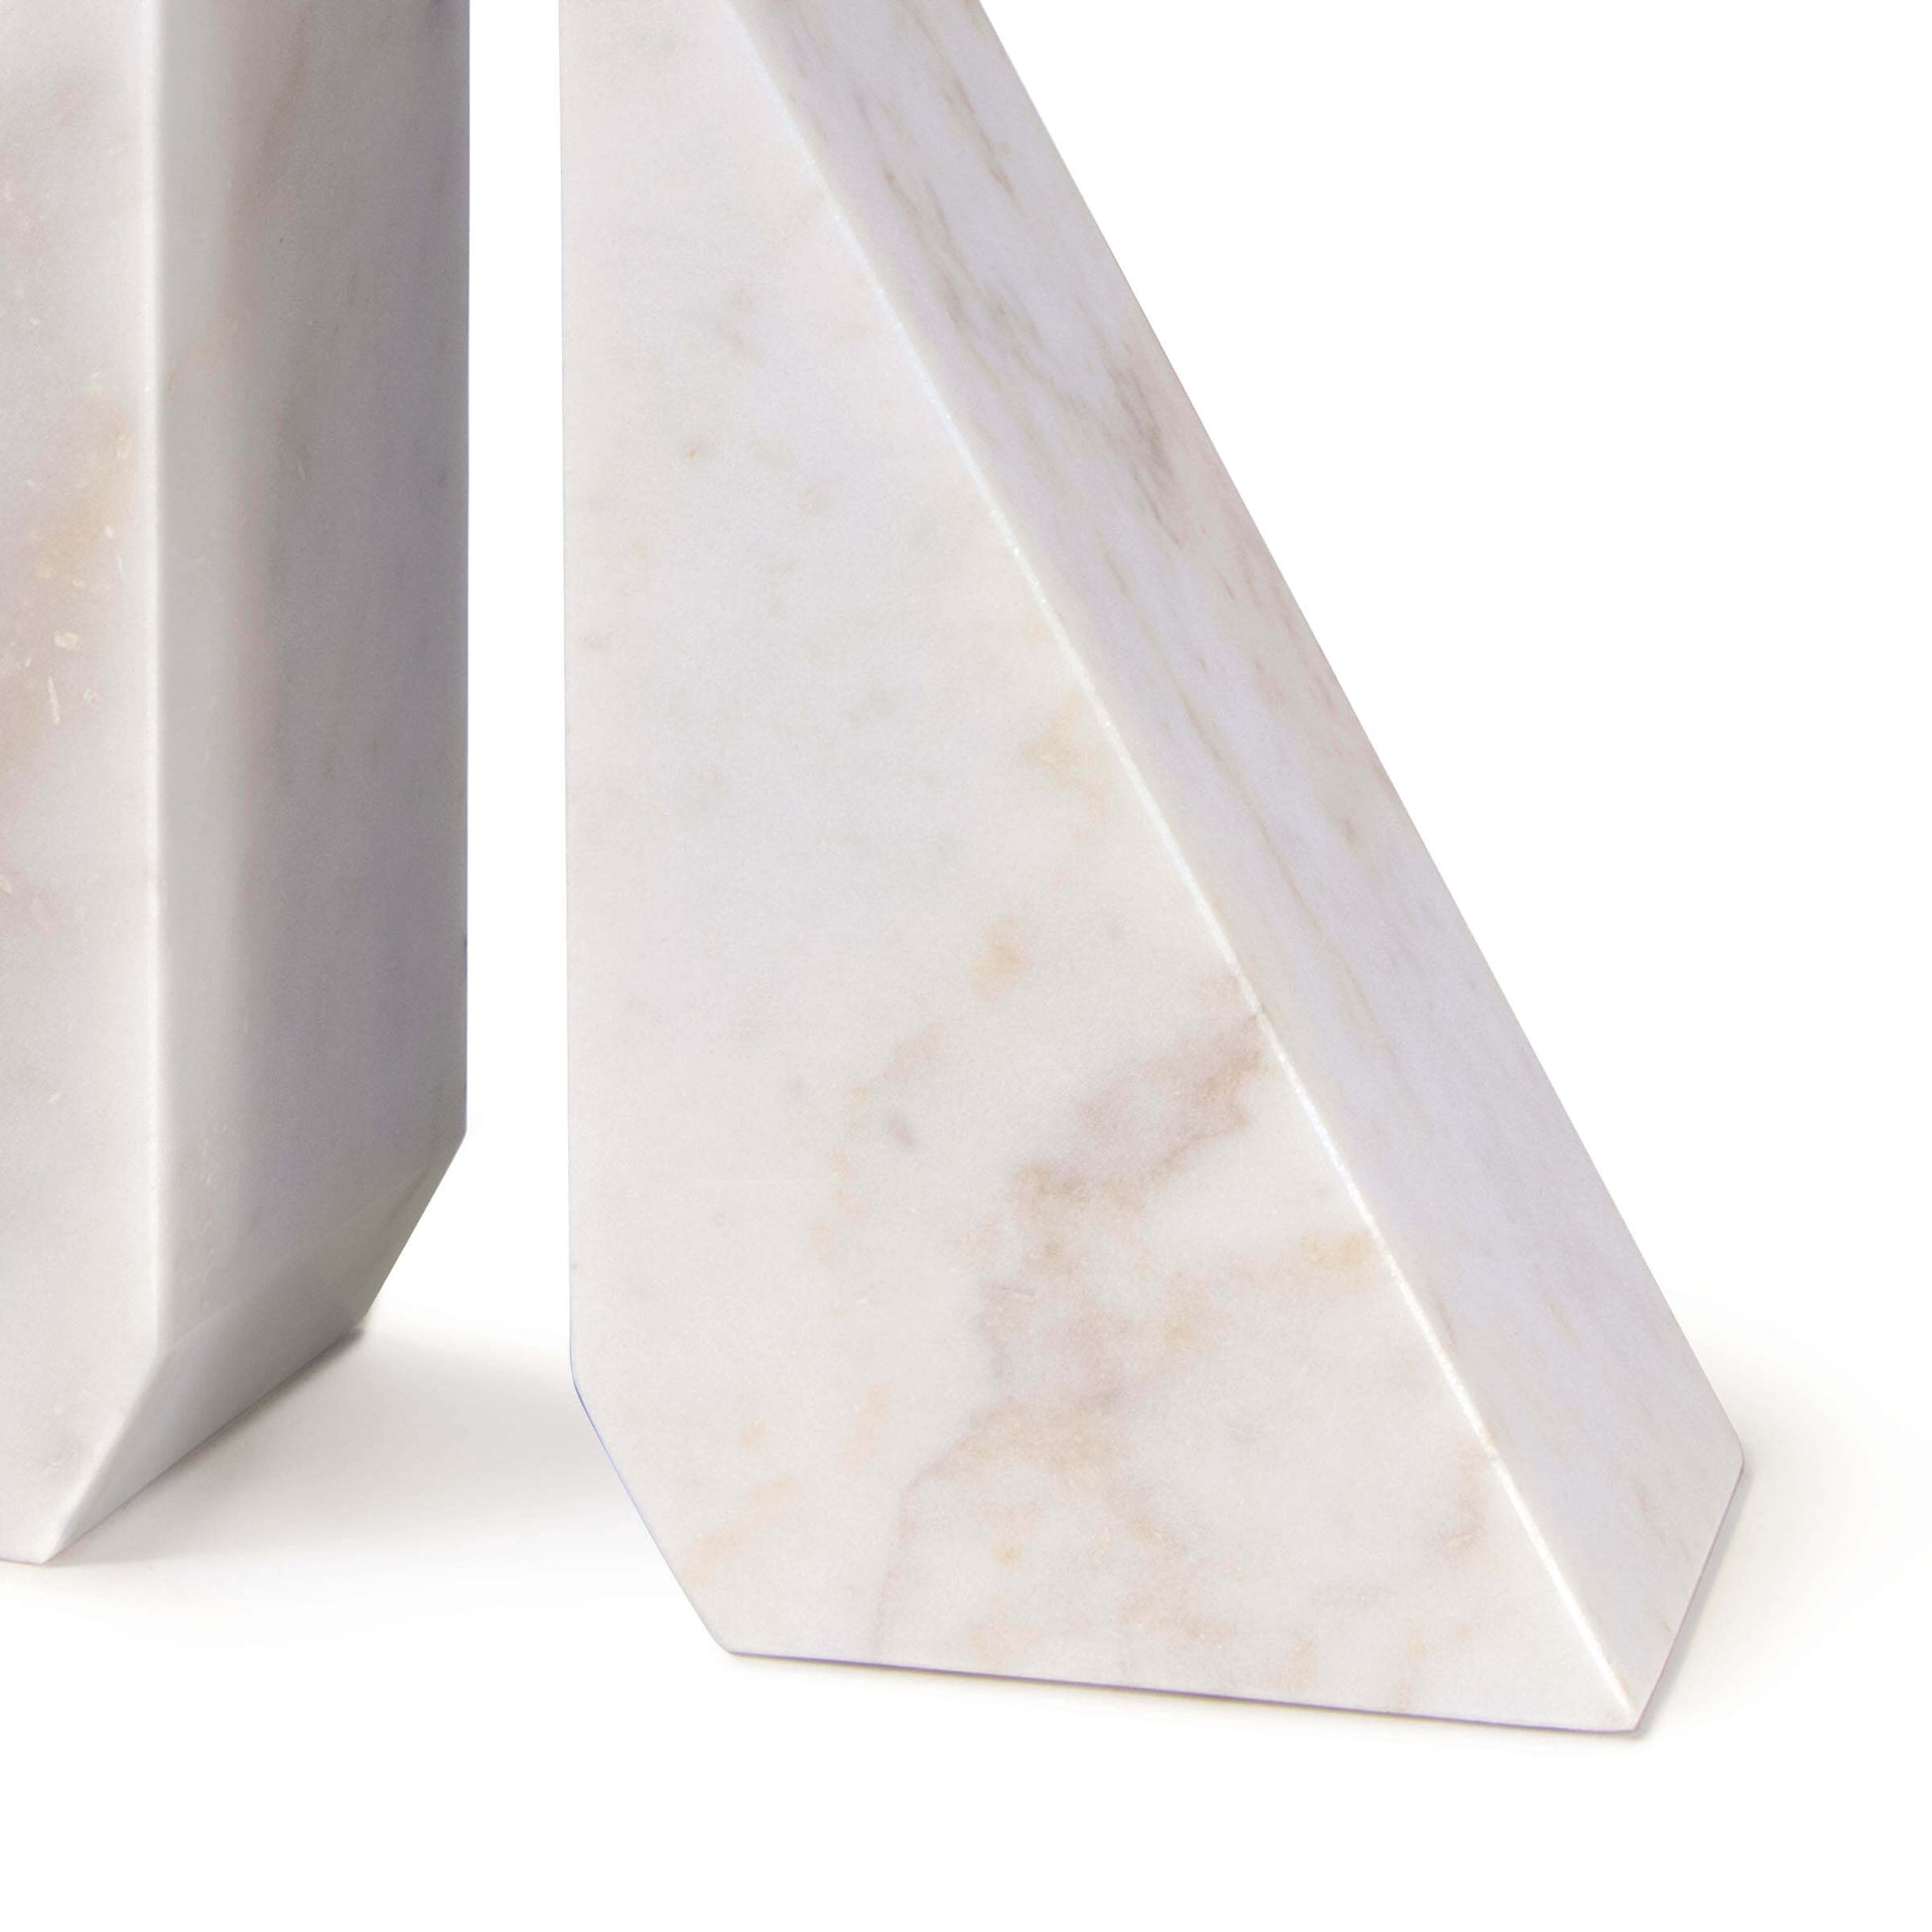 Othello Marble Bookends in White by Regina Andrew